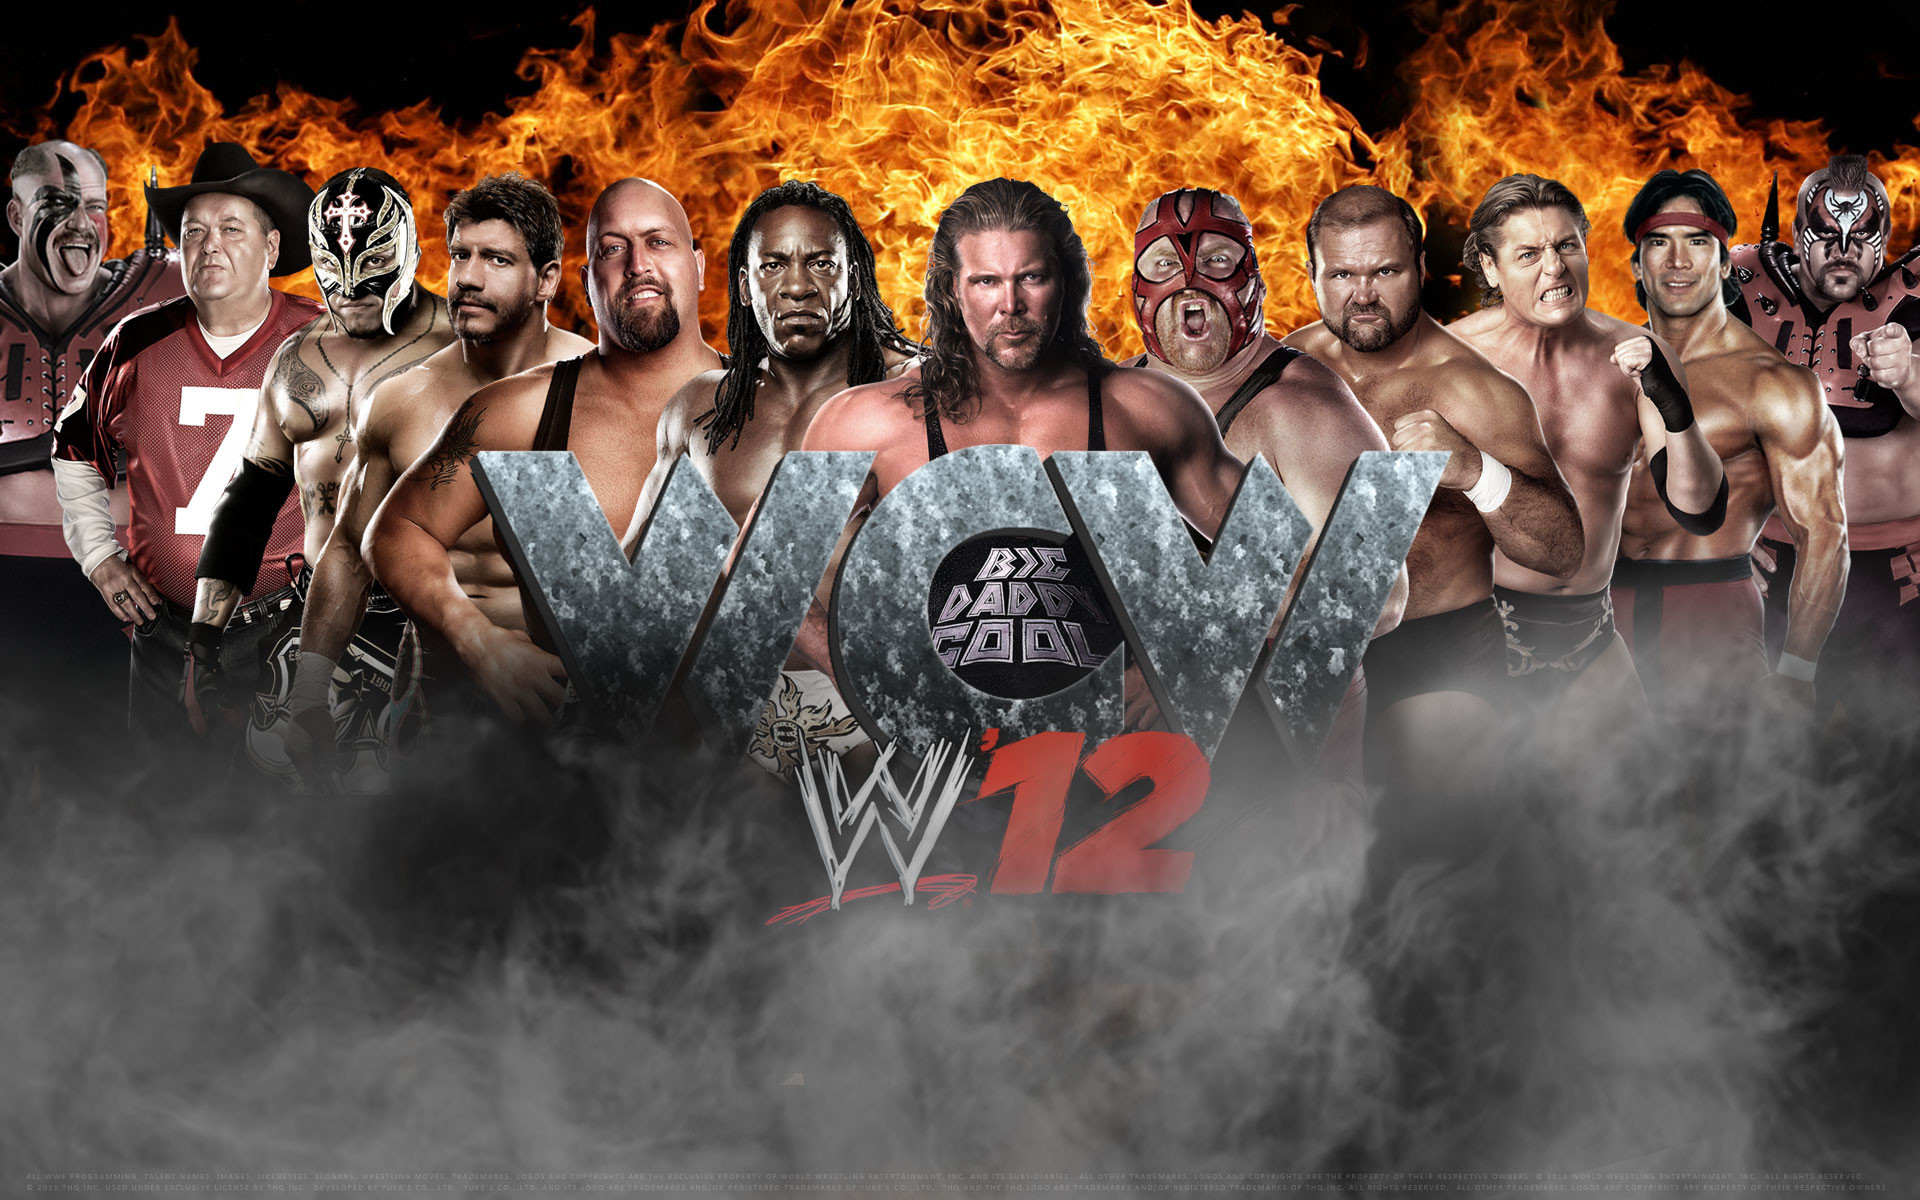 1920x1200 wcw | The WCW invasion starts again, only in WWE '12! New wallpaper